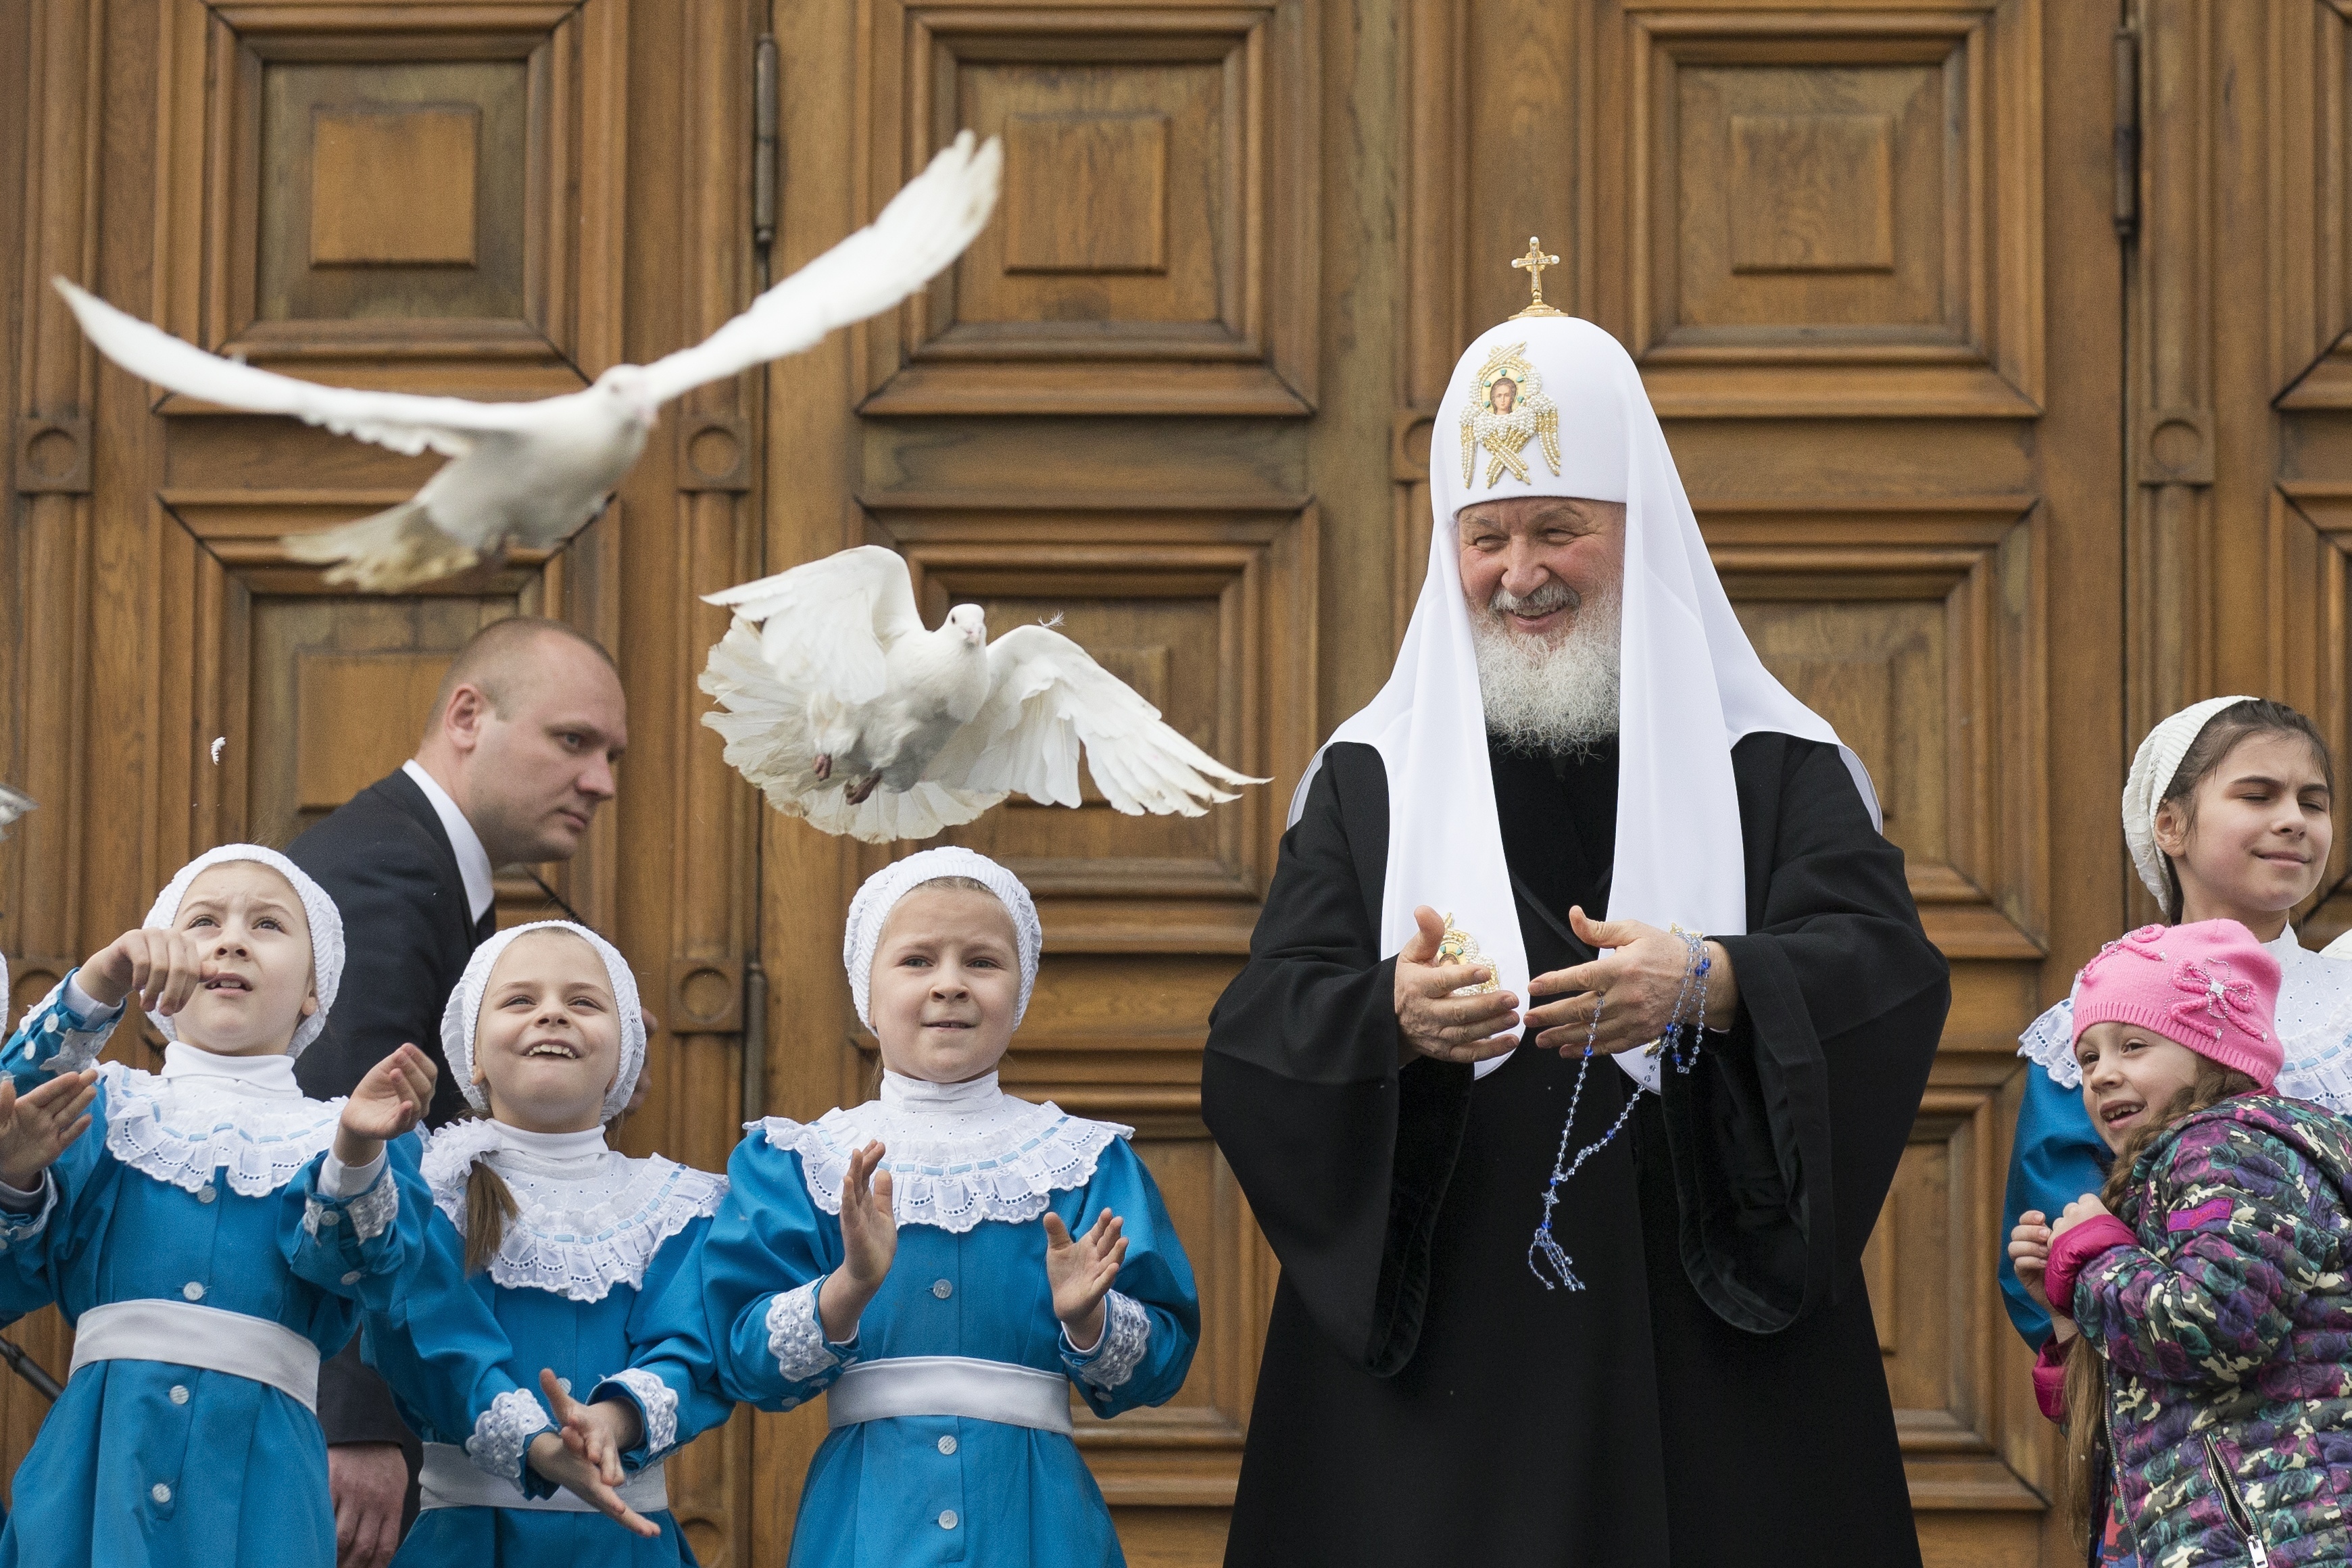 Russian Orthodox Church Patriarch Kirill, center, releases birds at Annunciation Cathedral in the Moscow's Kremlin in Moscow, Russia, Friday, April 7, 2017, to mark the Russian Orthodox holiday of the Annunciation. (AP Photo/Alexander Zemlianichenko)